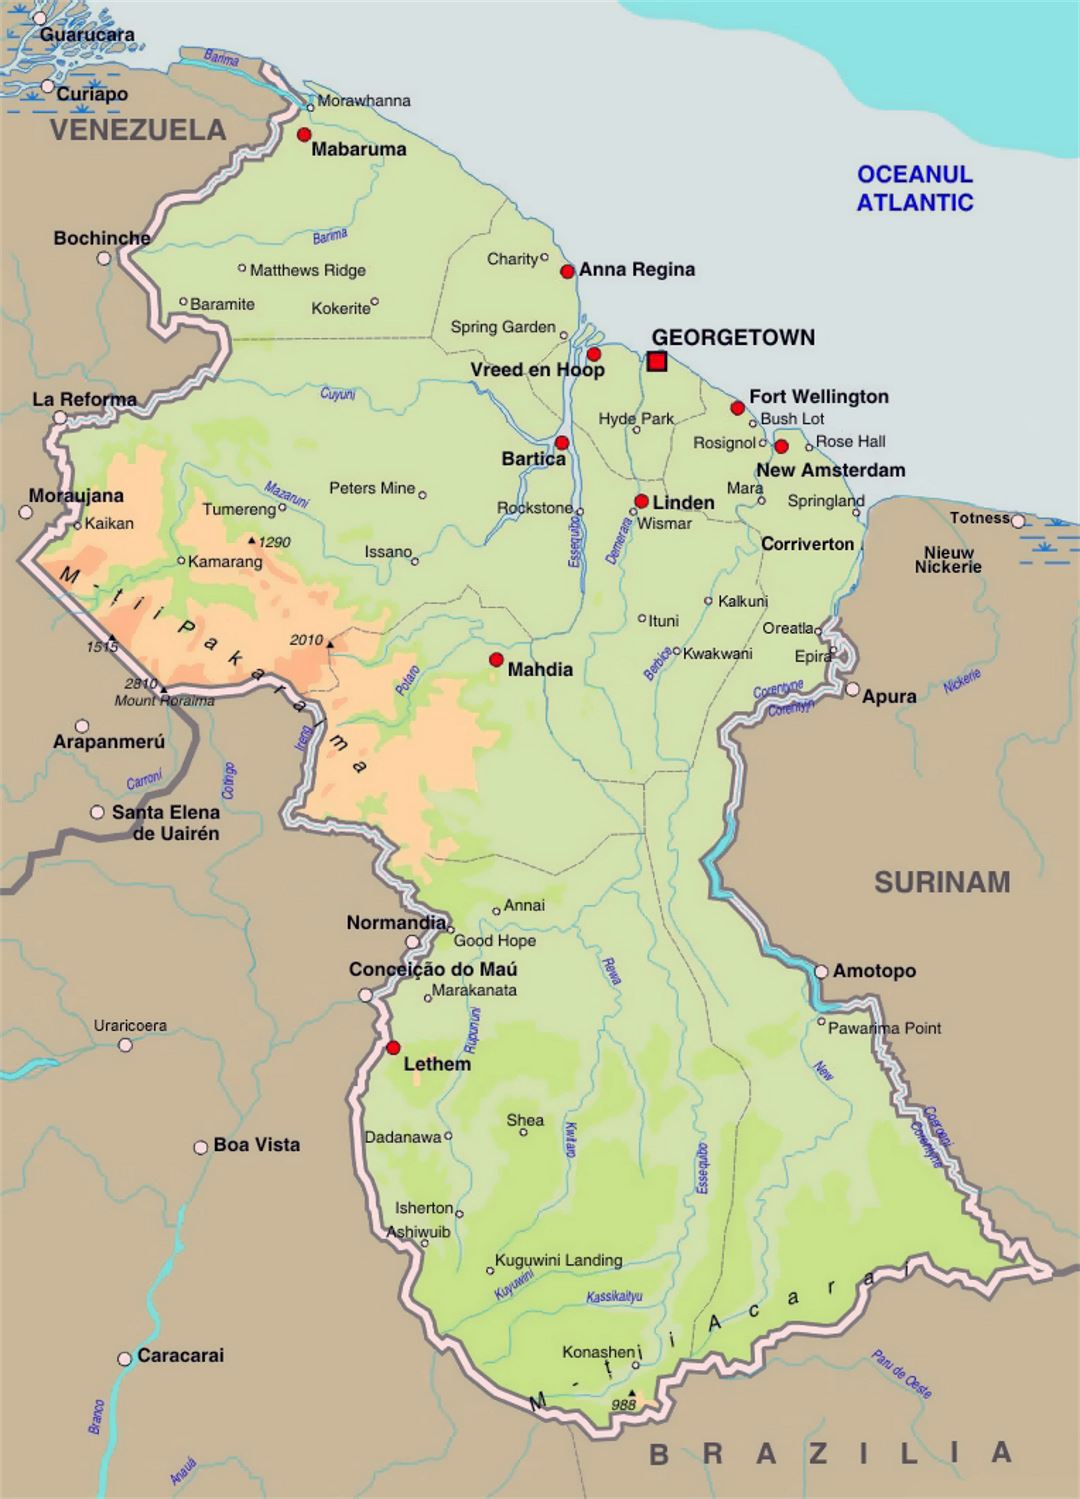 Detailed elevation map of Guyana with roads and cities